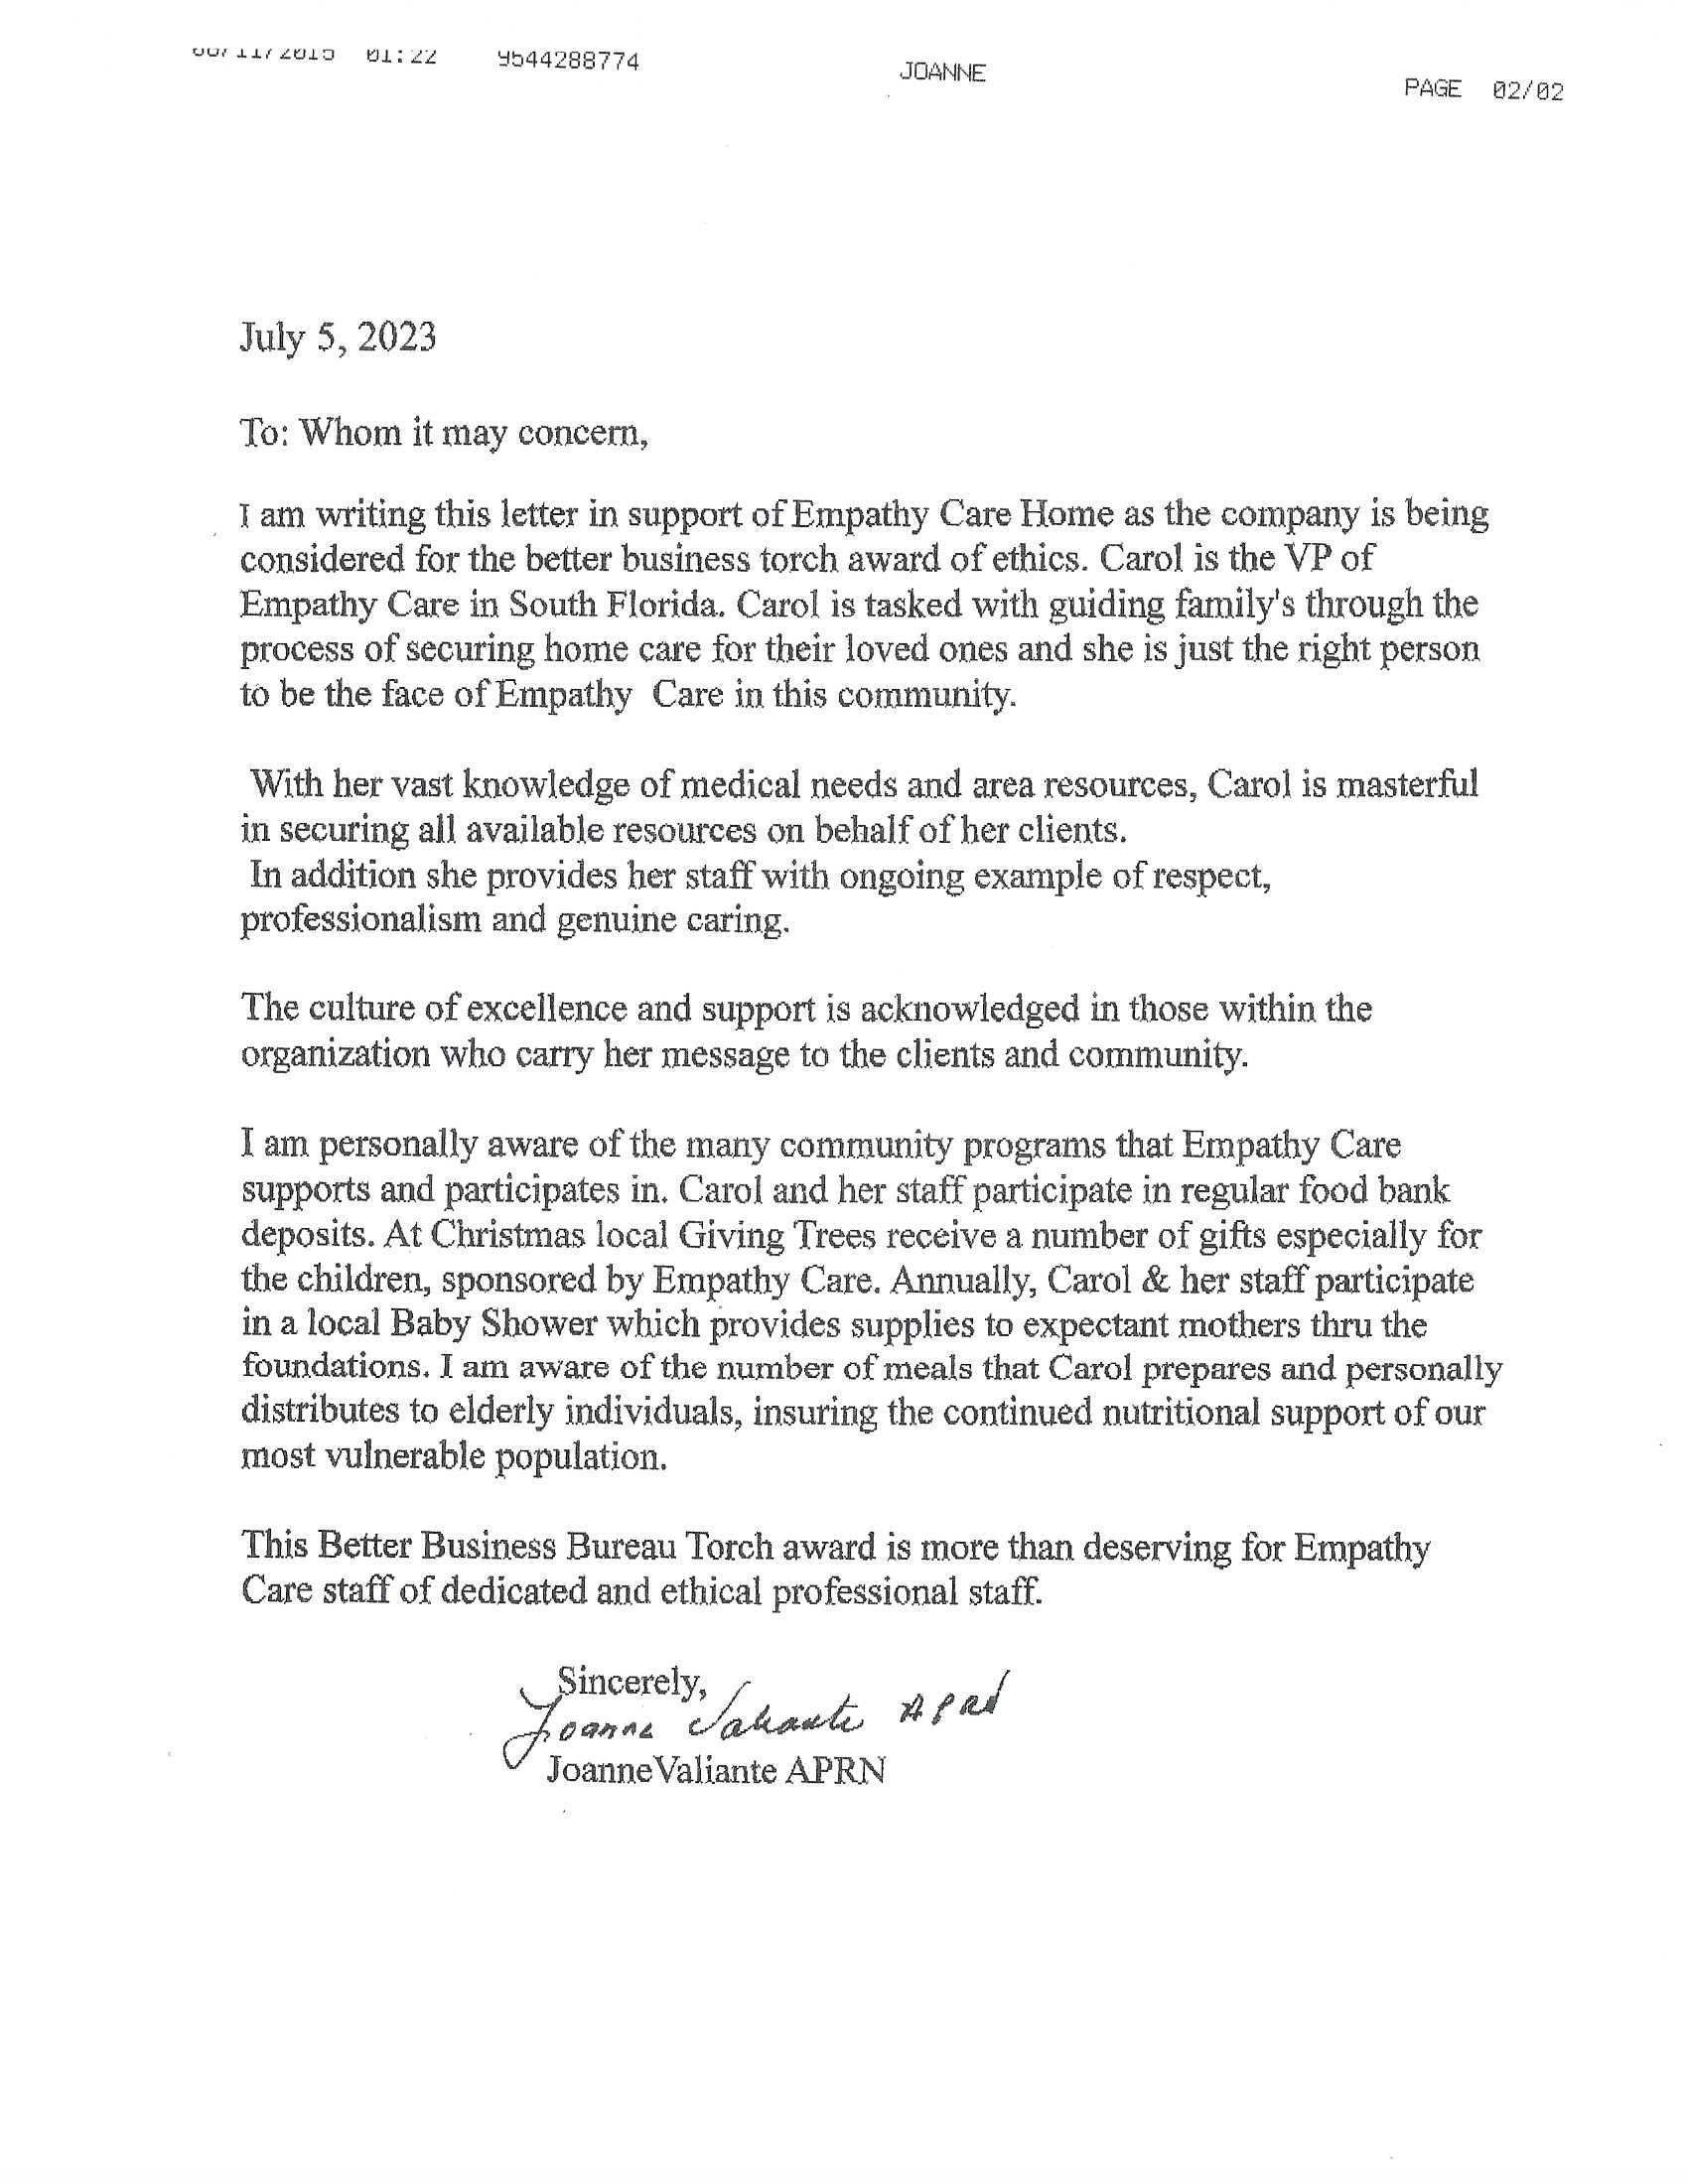 Letters of Recommendation - Empathy Care 2023 (1)_Page_13